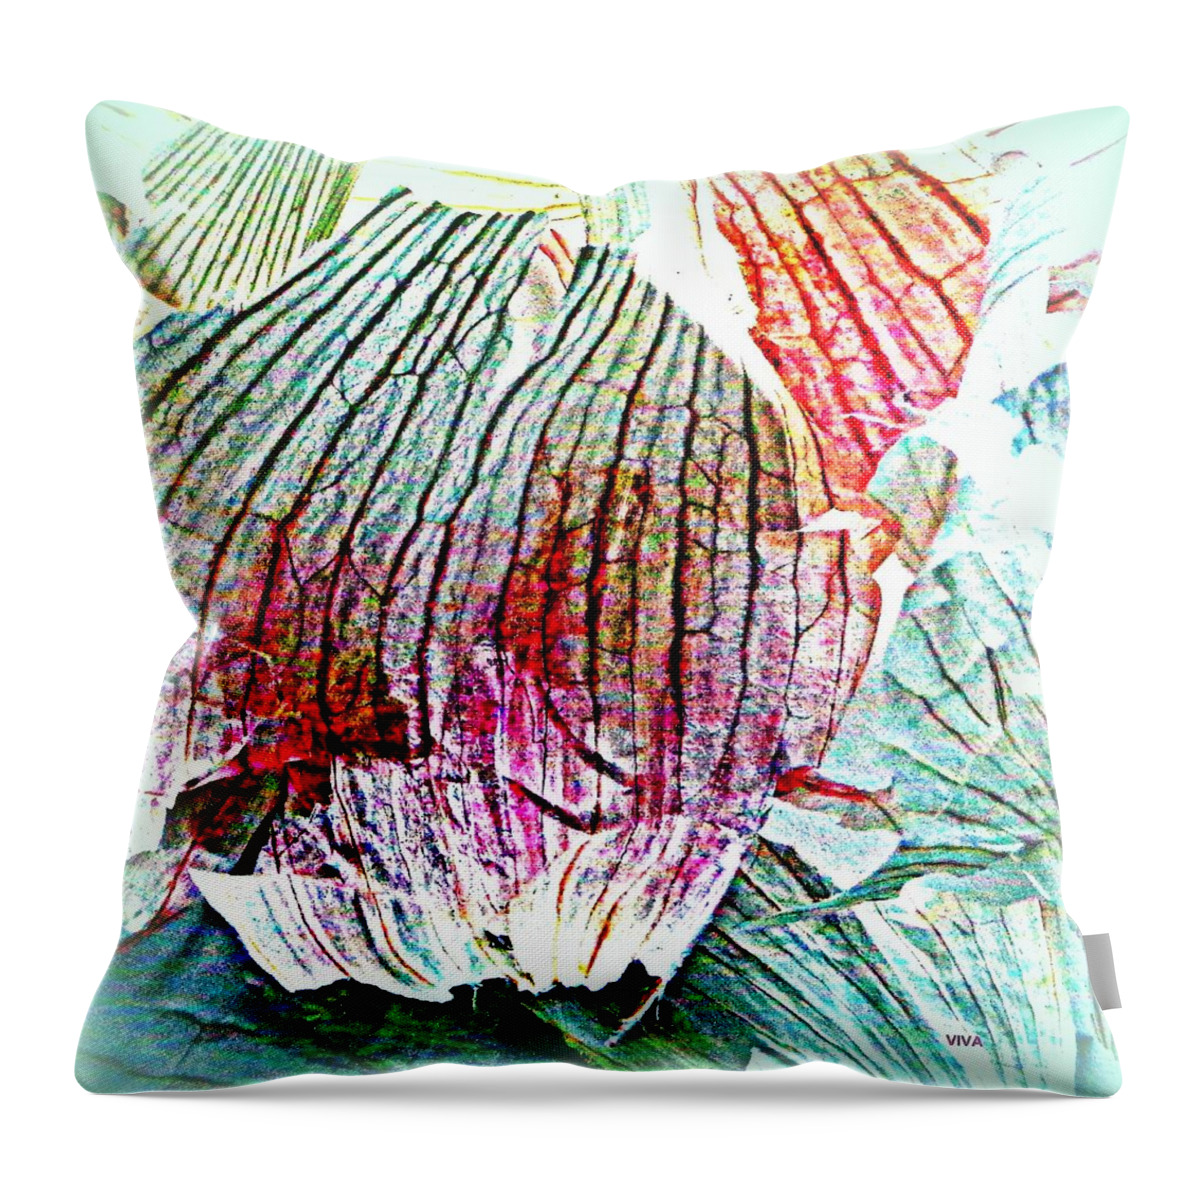 Garlic Peel Throw Pillow featuring the photograph Garlic Abstract  Series by VIVA Anderson